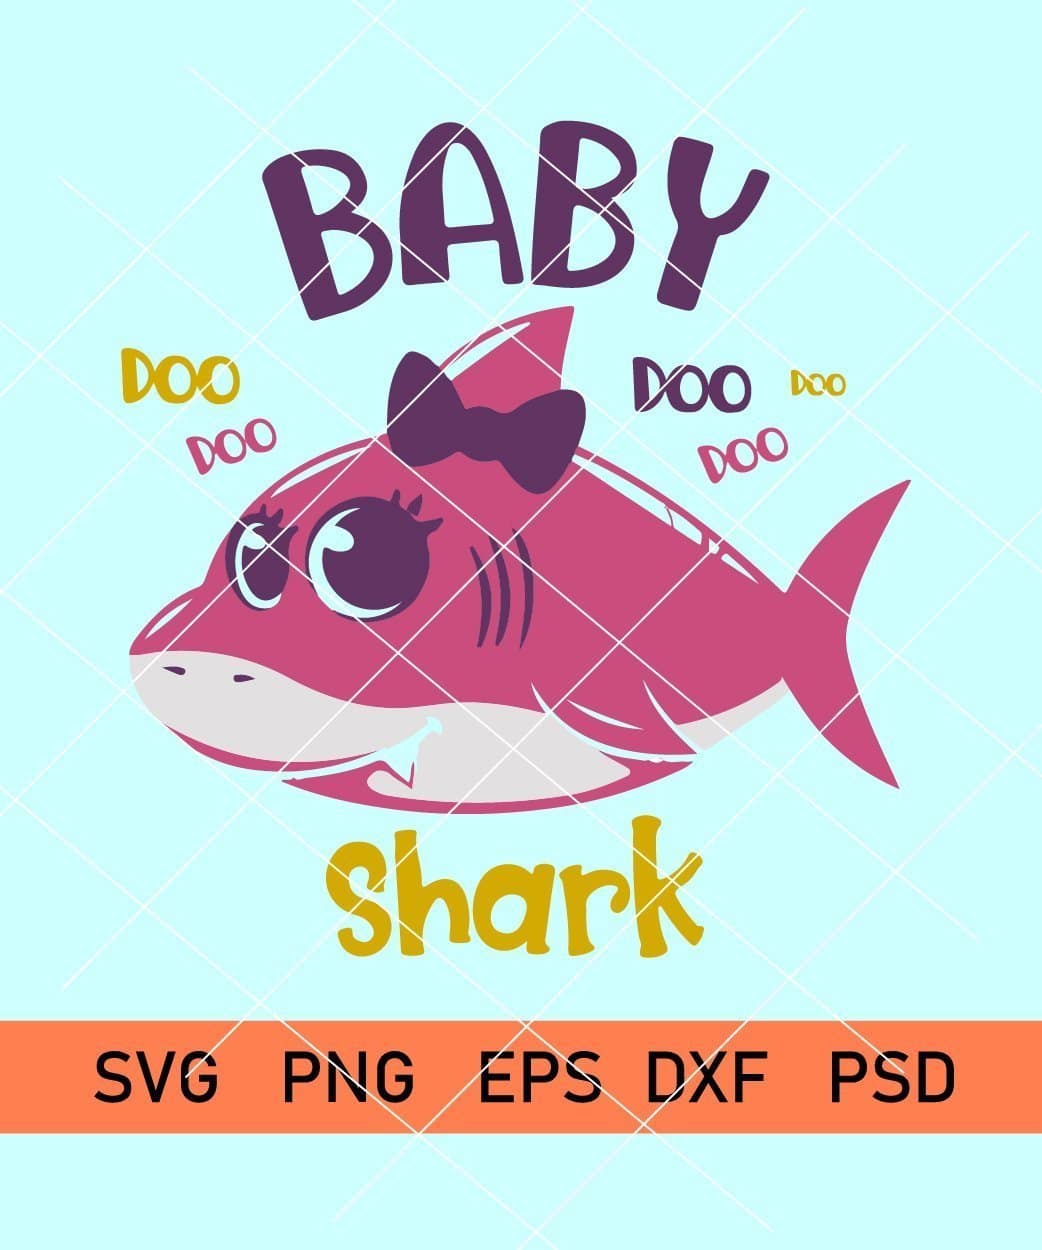 Download Shark Svg Files For Silhouette Cameo Or Cricut Vector Fish Svg Doo Doo Doo Baby Shark Svg Svg Couple Svg Dxf Eps Clip Art Art Collectibles Deshpandefoundationindia Org